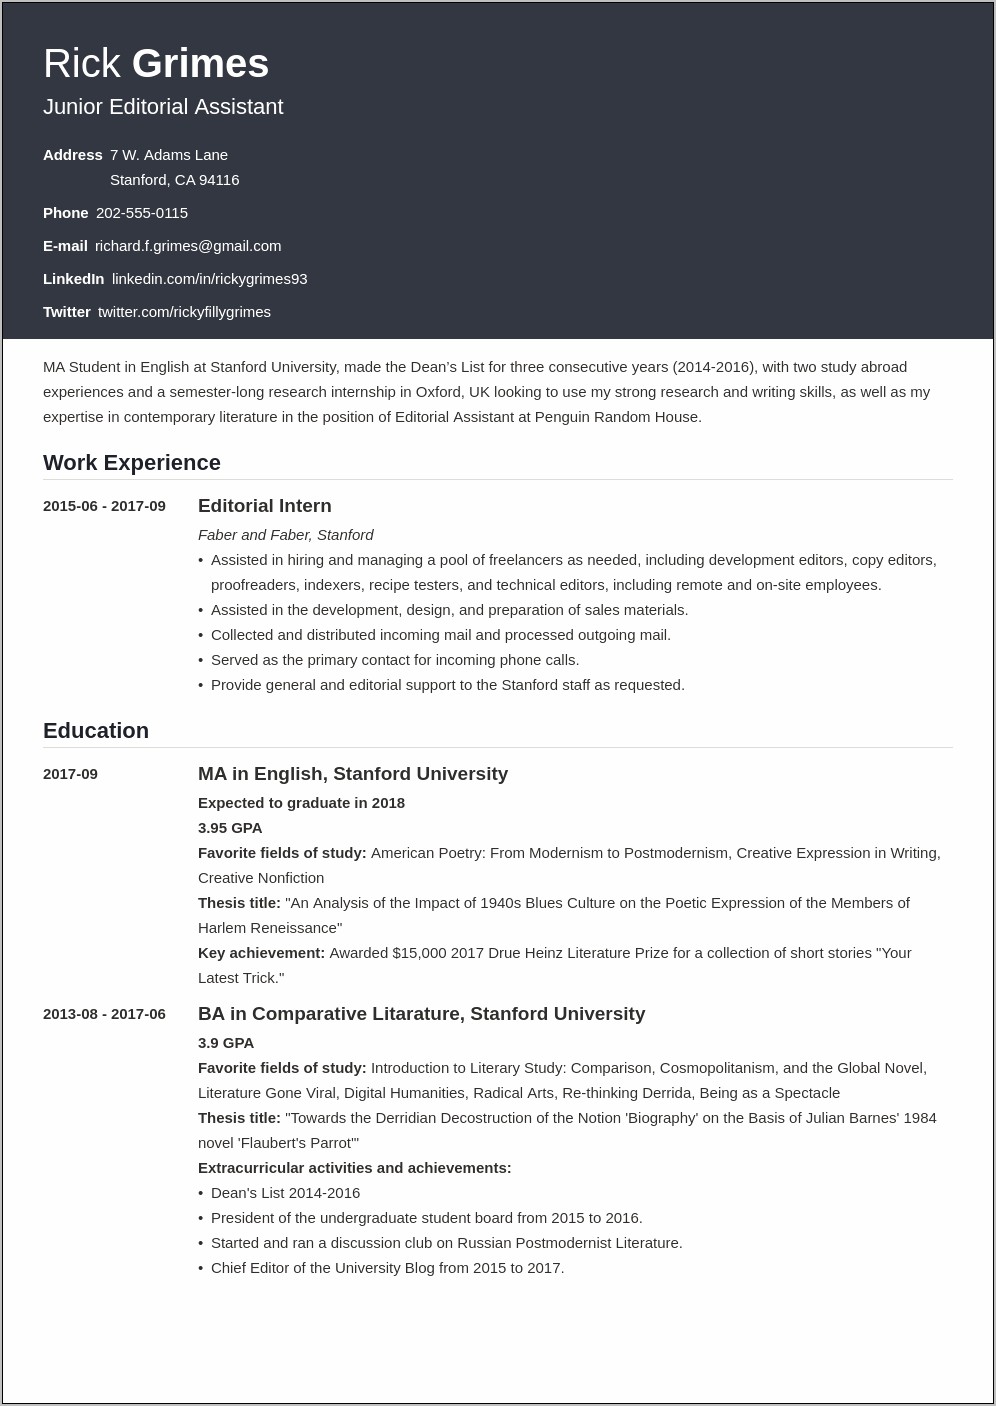 Professional Summary For Resume Examples Entry Level